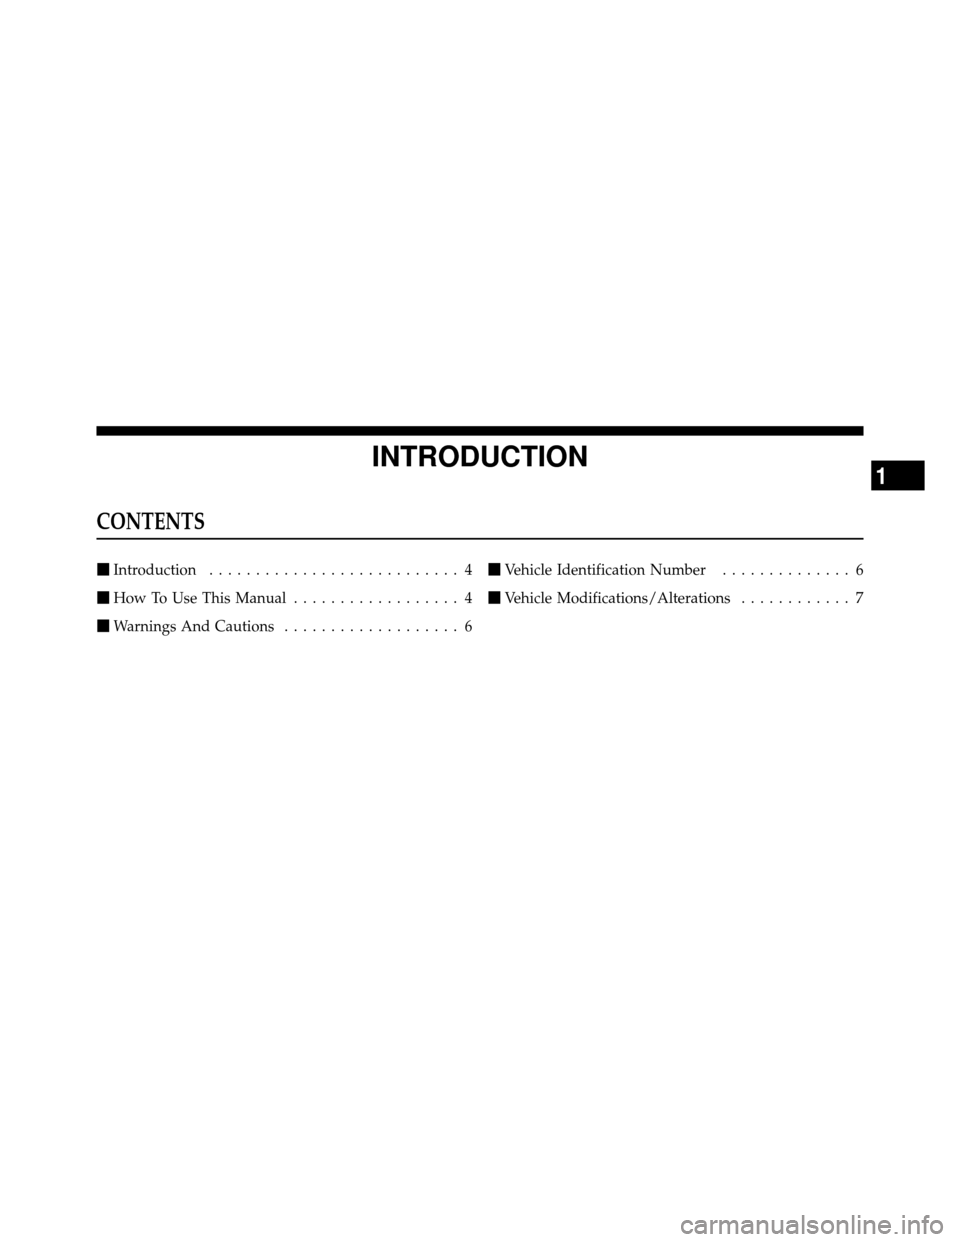 Ram Cargo Van 2012  Owners Manual INTRODUCTION
CONTENTS
Introduction ........................... 4
 How To Use This Manual .................. 4
 Warnings And Cautions ................... 6 
Vehicle Identification Number ..........